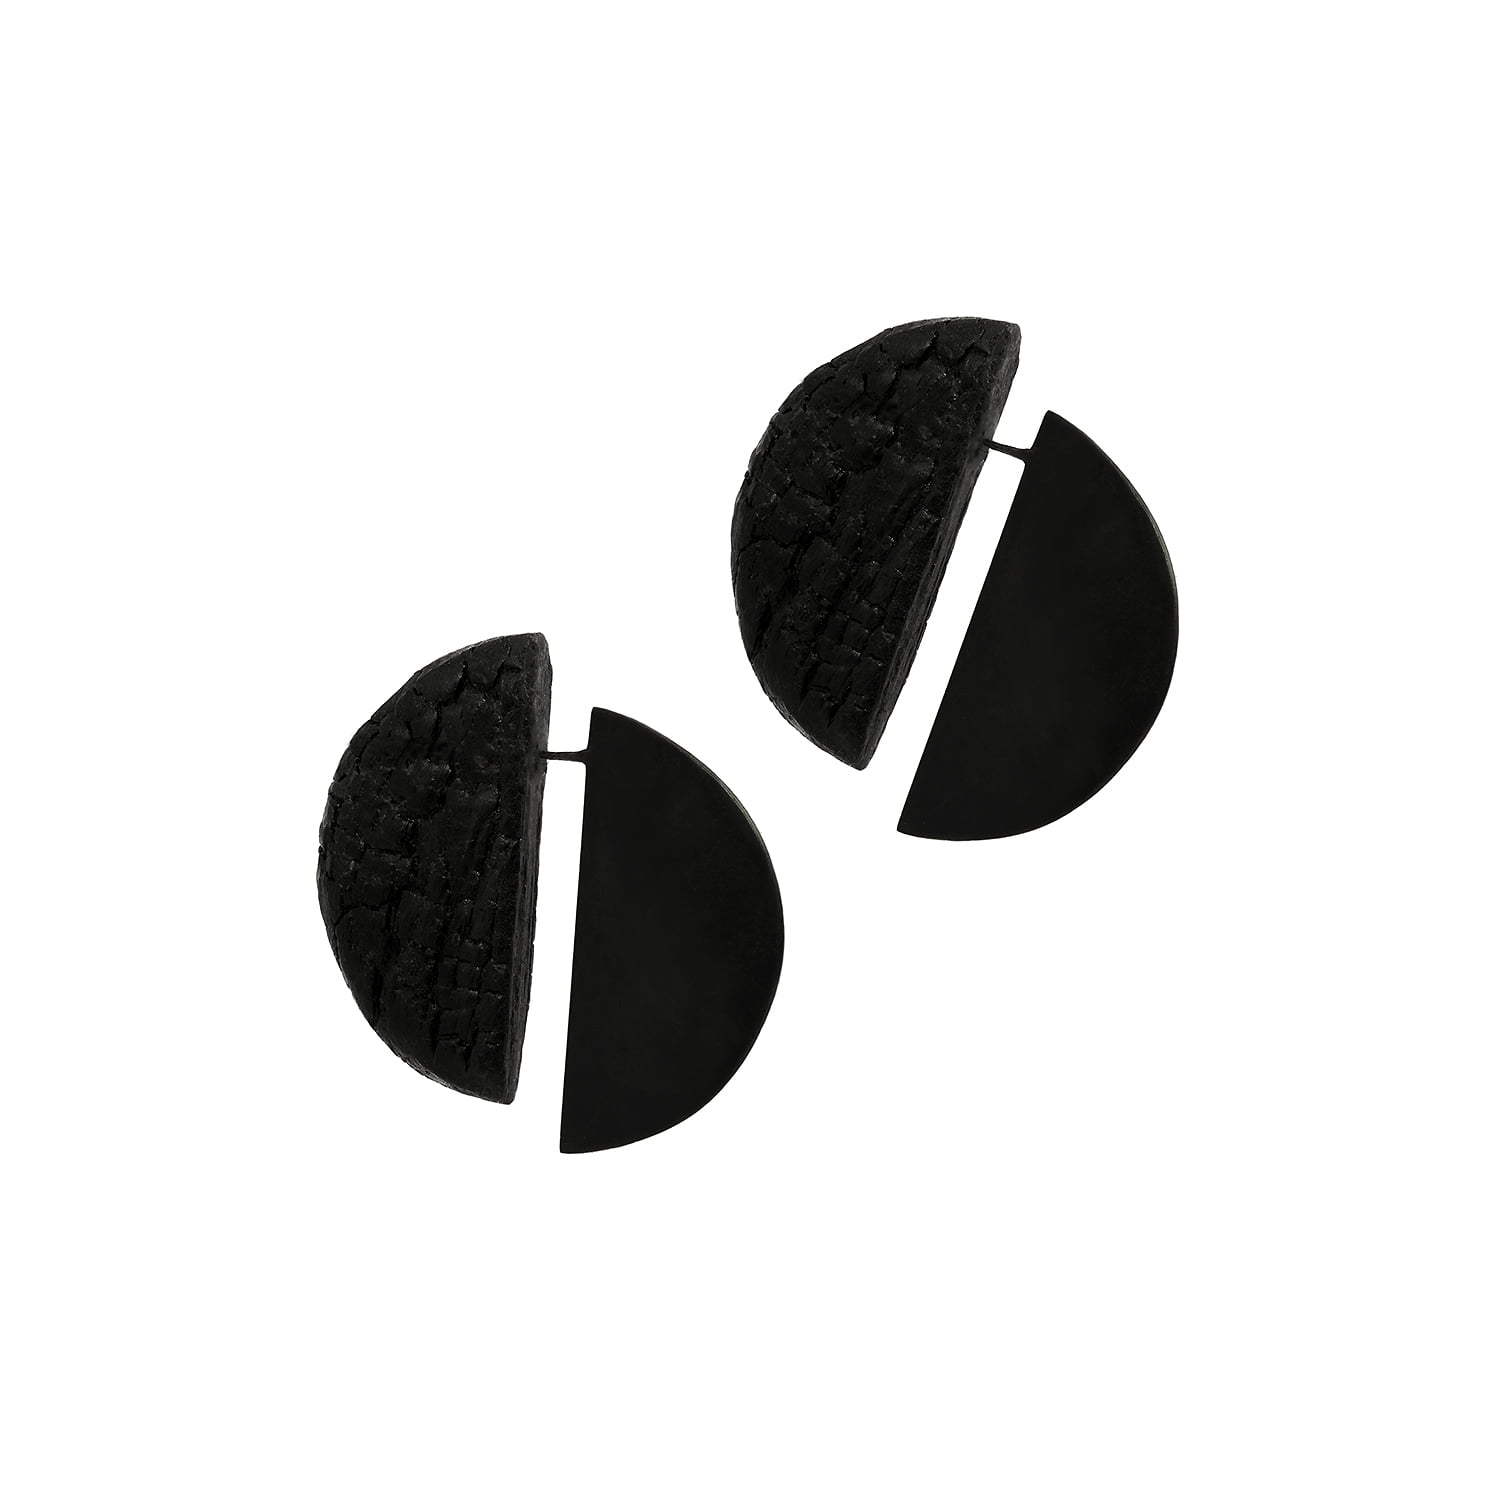 To Steve Reich – Music for 18 Musicians. Earrings, single edition, 2017.